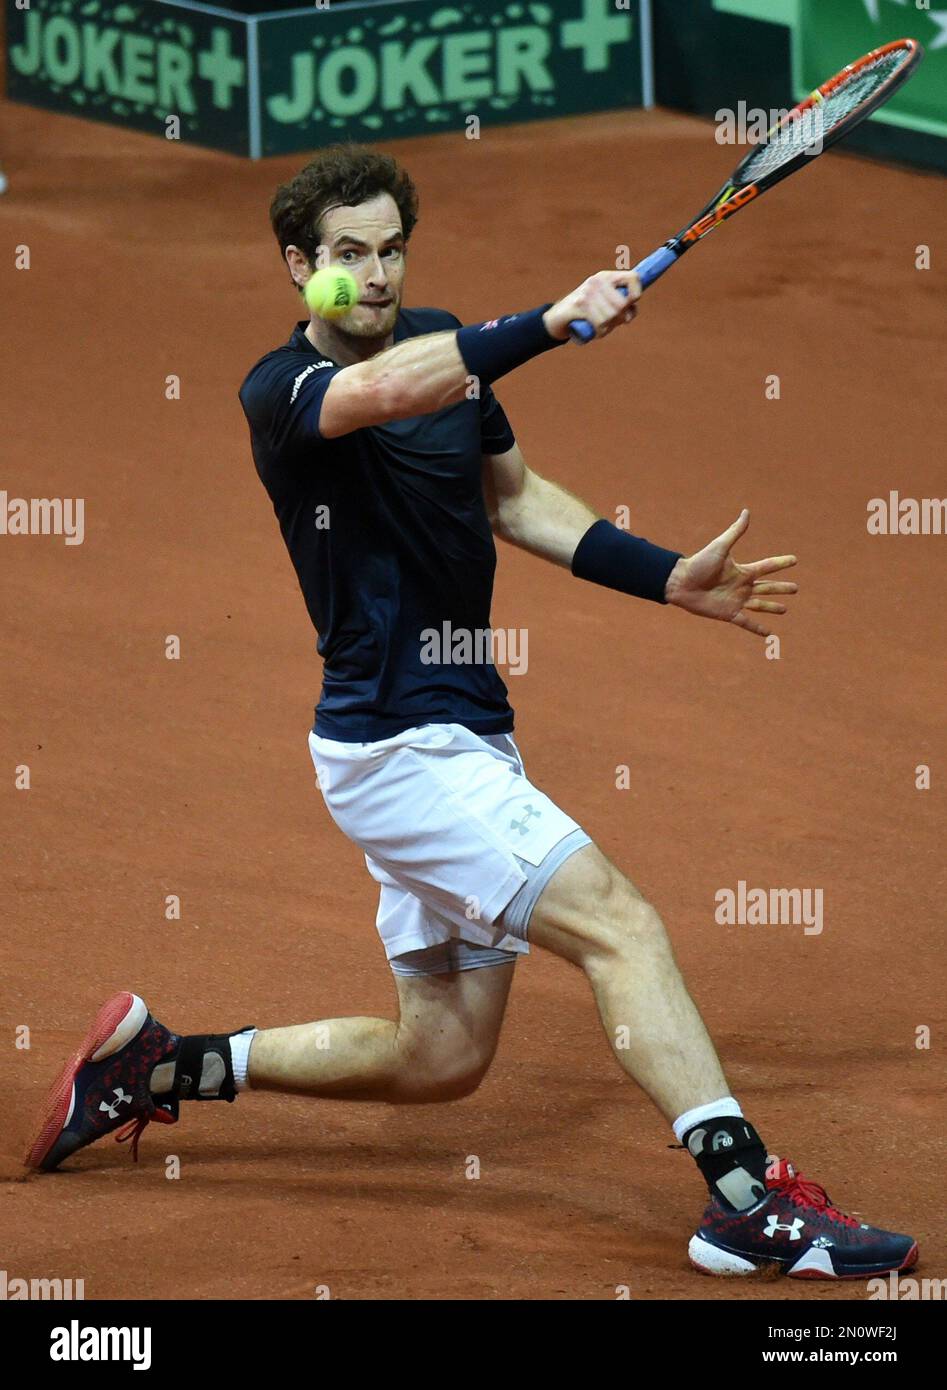 Britains Andy Murray returns a ball to Belgiums Ruben Bemelmans during their Davis Cup final tennis match at the Flanders Expo in Ghent, Belgium, Friday, Nov